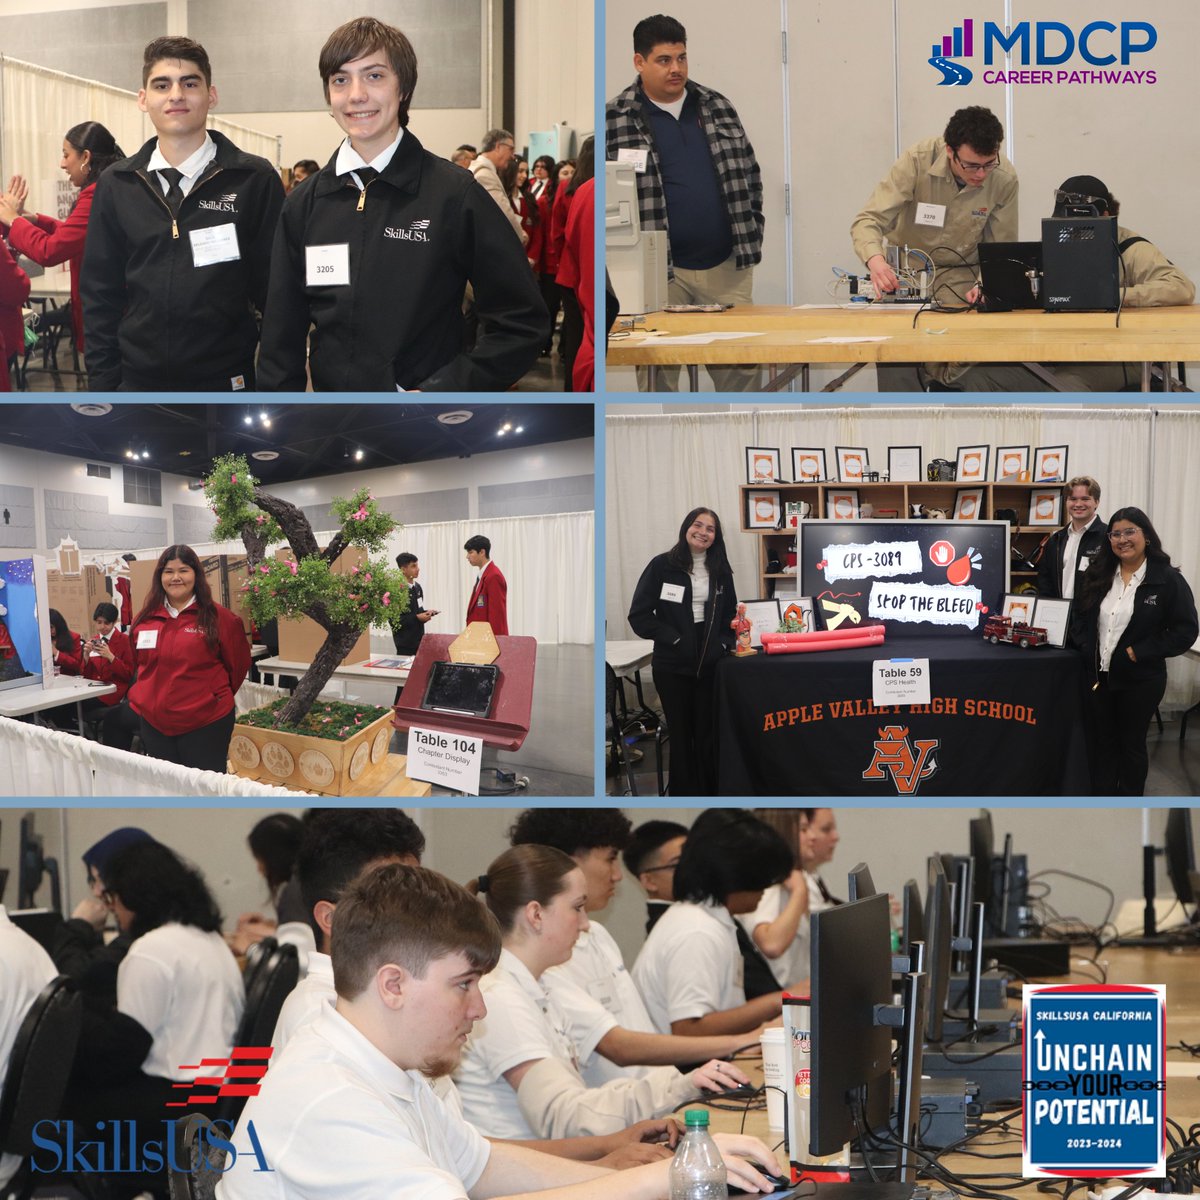 Students showcasing their talents and skills across various competitions at the SkillsUSA State Leadership & Skills Conference. #SkillsUSA #skillsusaca